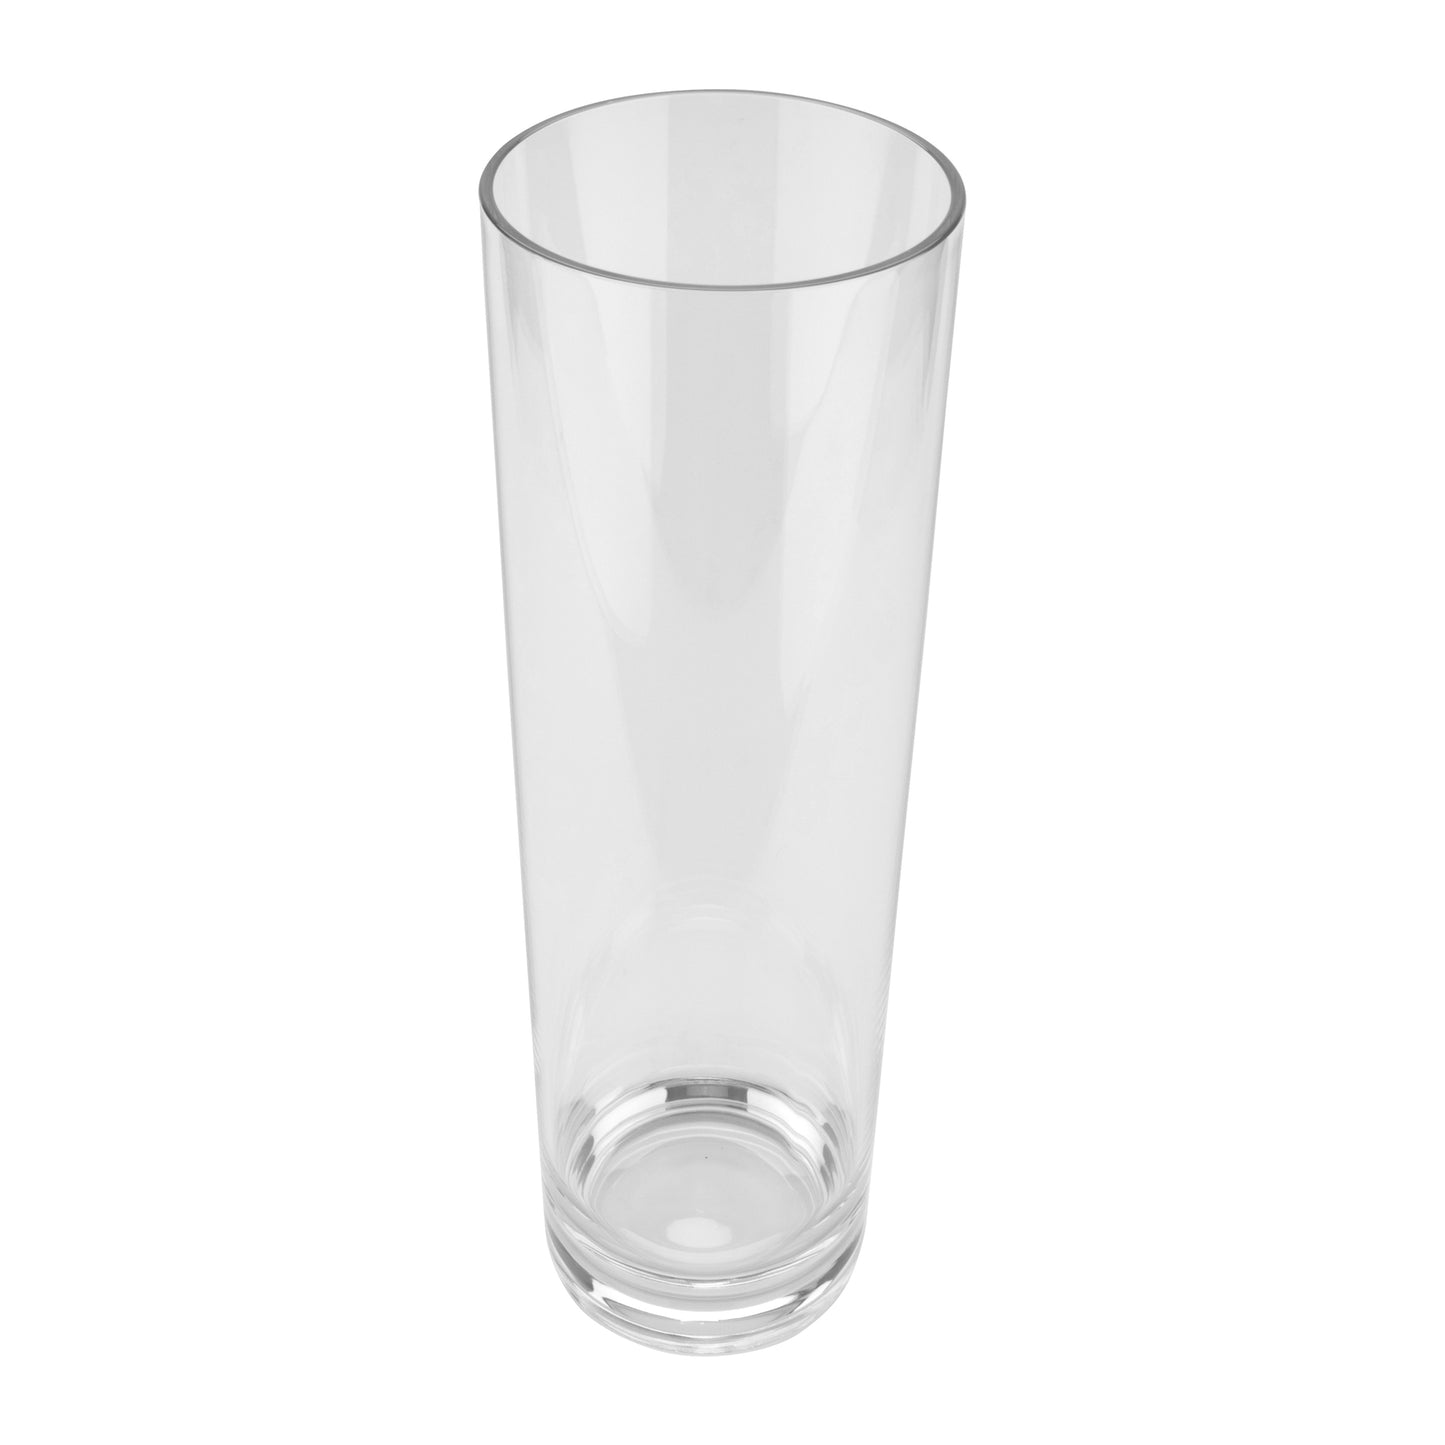 19.75" Tall, Tabletop, Display, Accent Vase, Break Resistant Plastic, 5.75" dia., G.E.T. Table Accessories